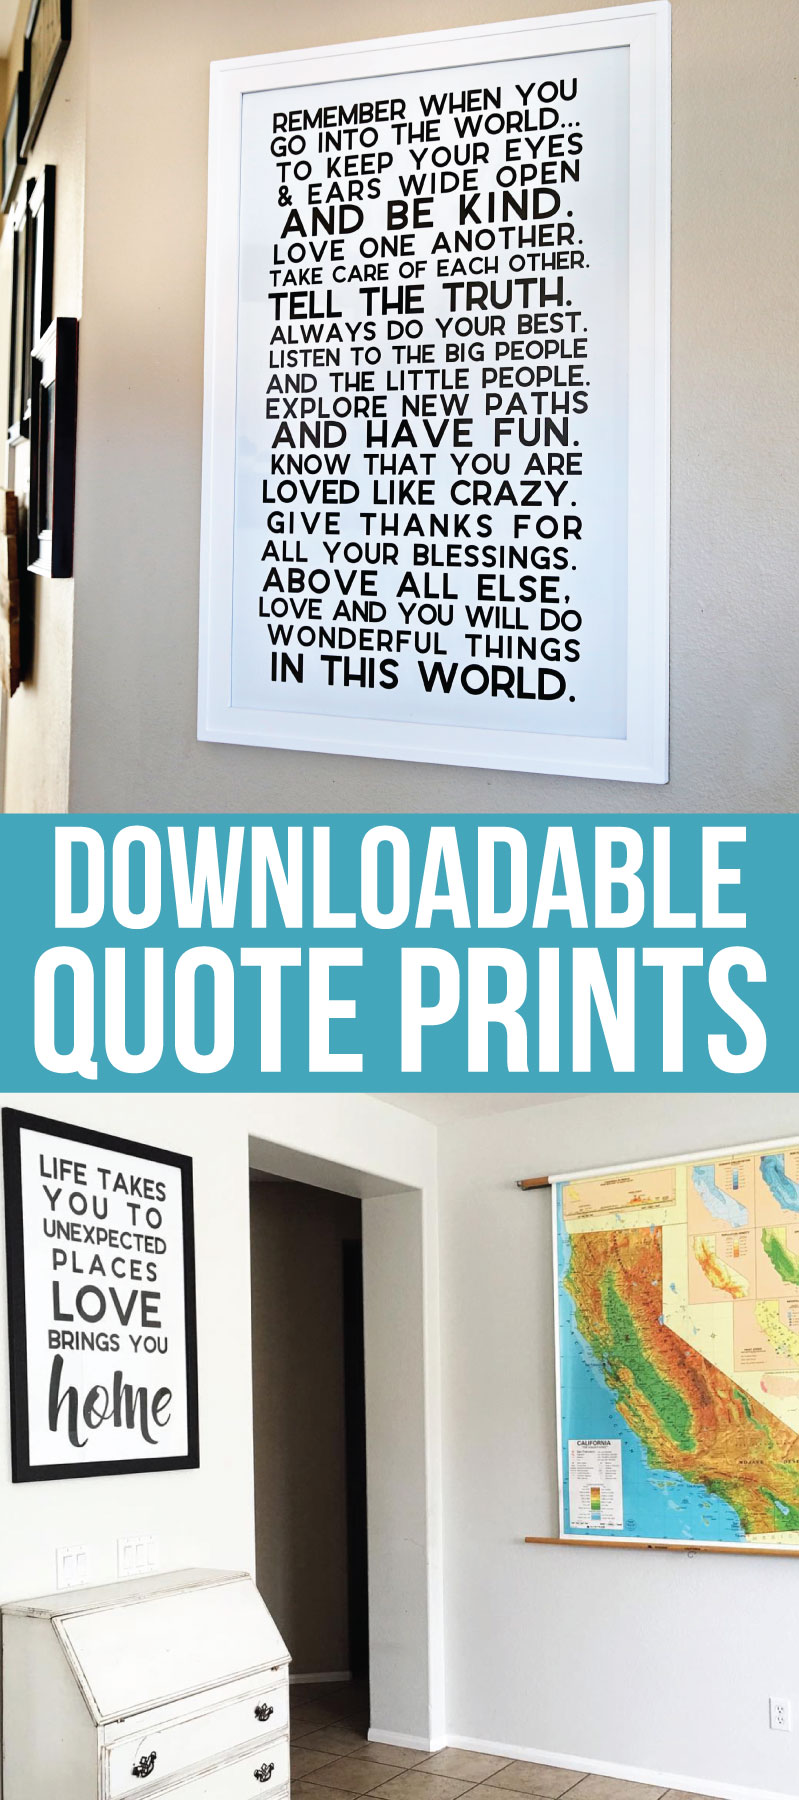 Inspirational Quotes for Home Decor - get one of these prints to hang in your home! via thirtyhandmadedays.com